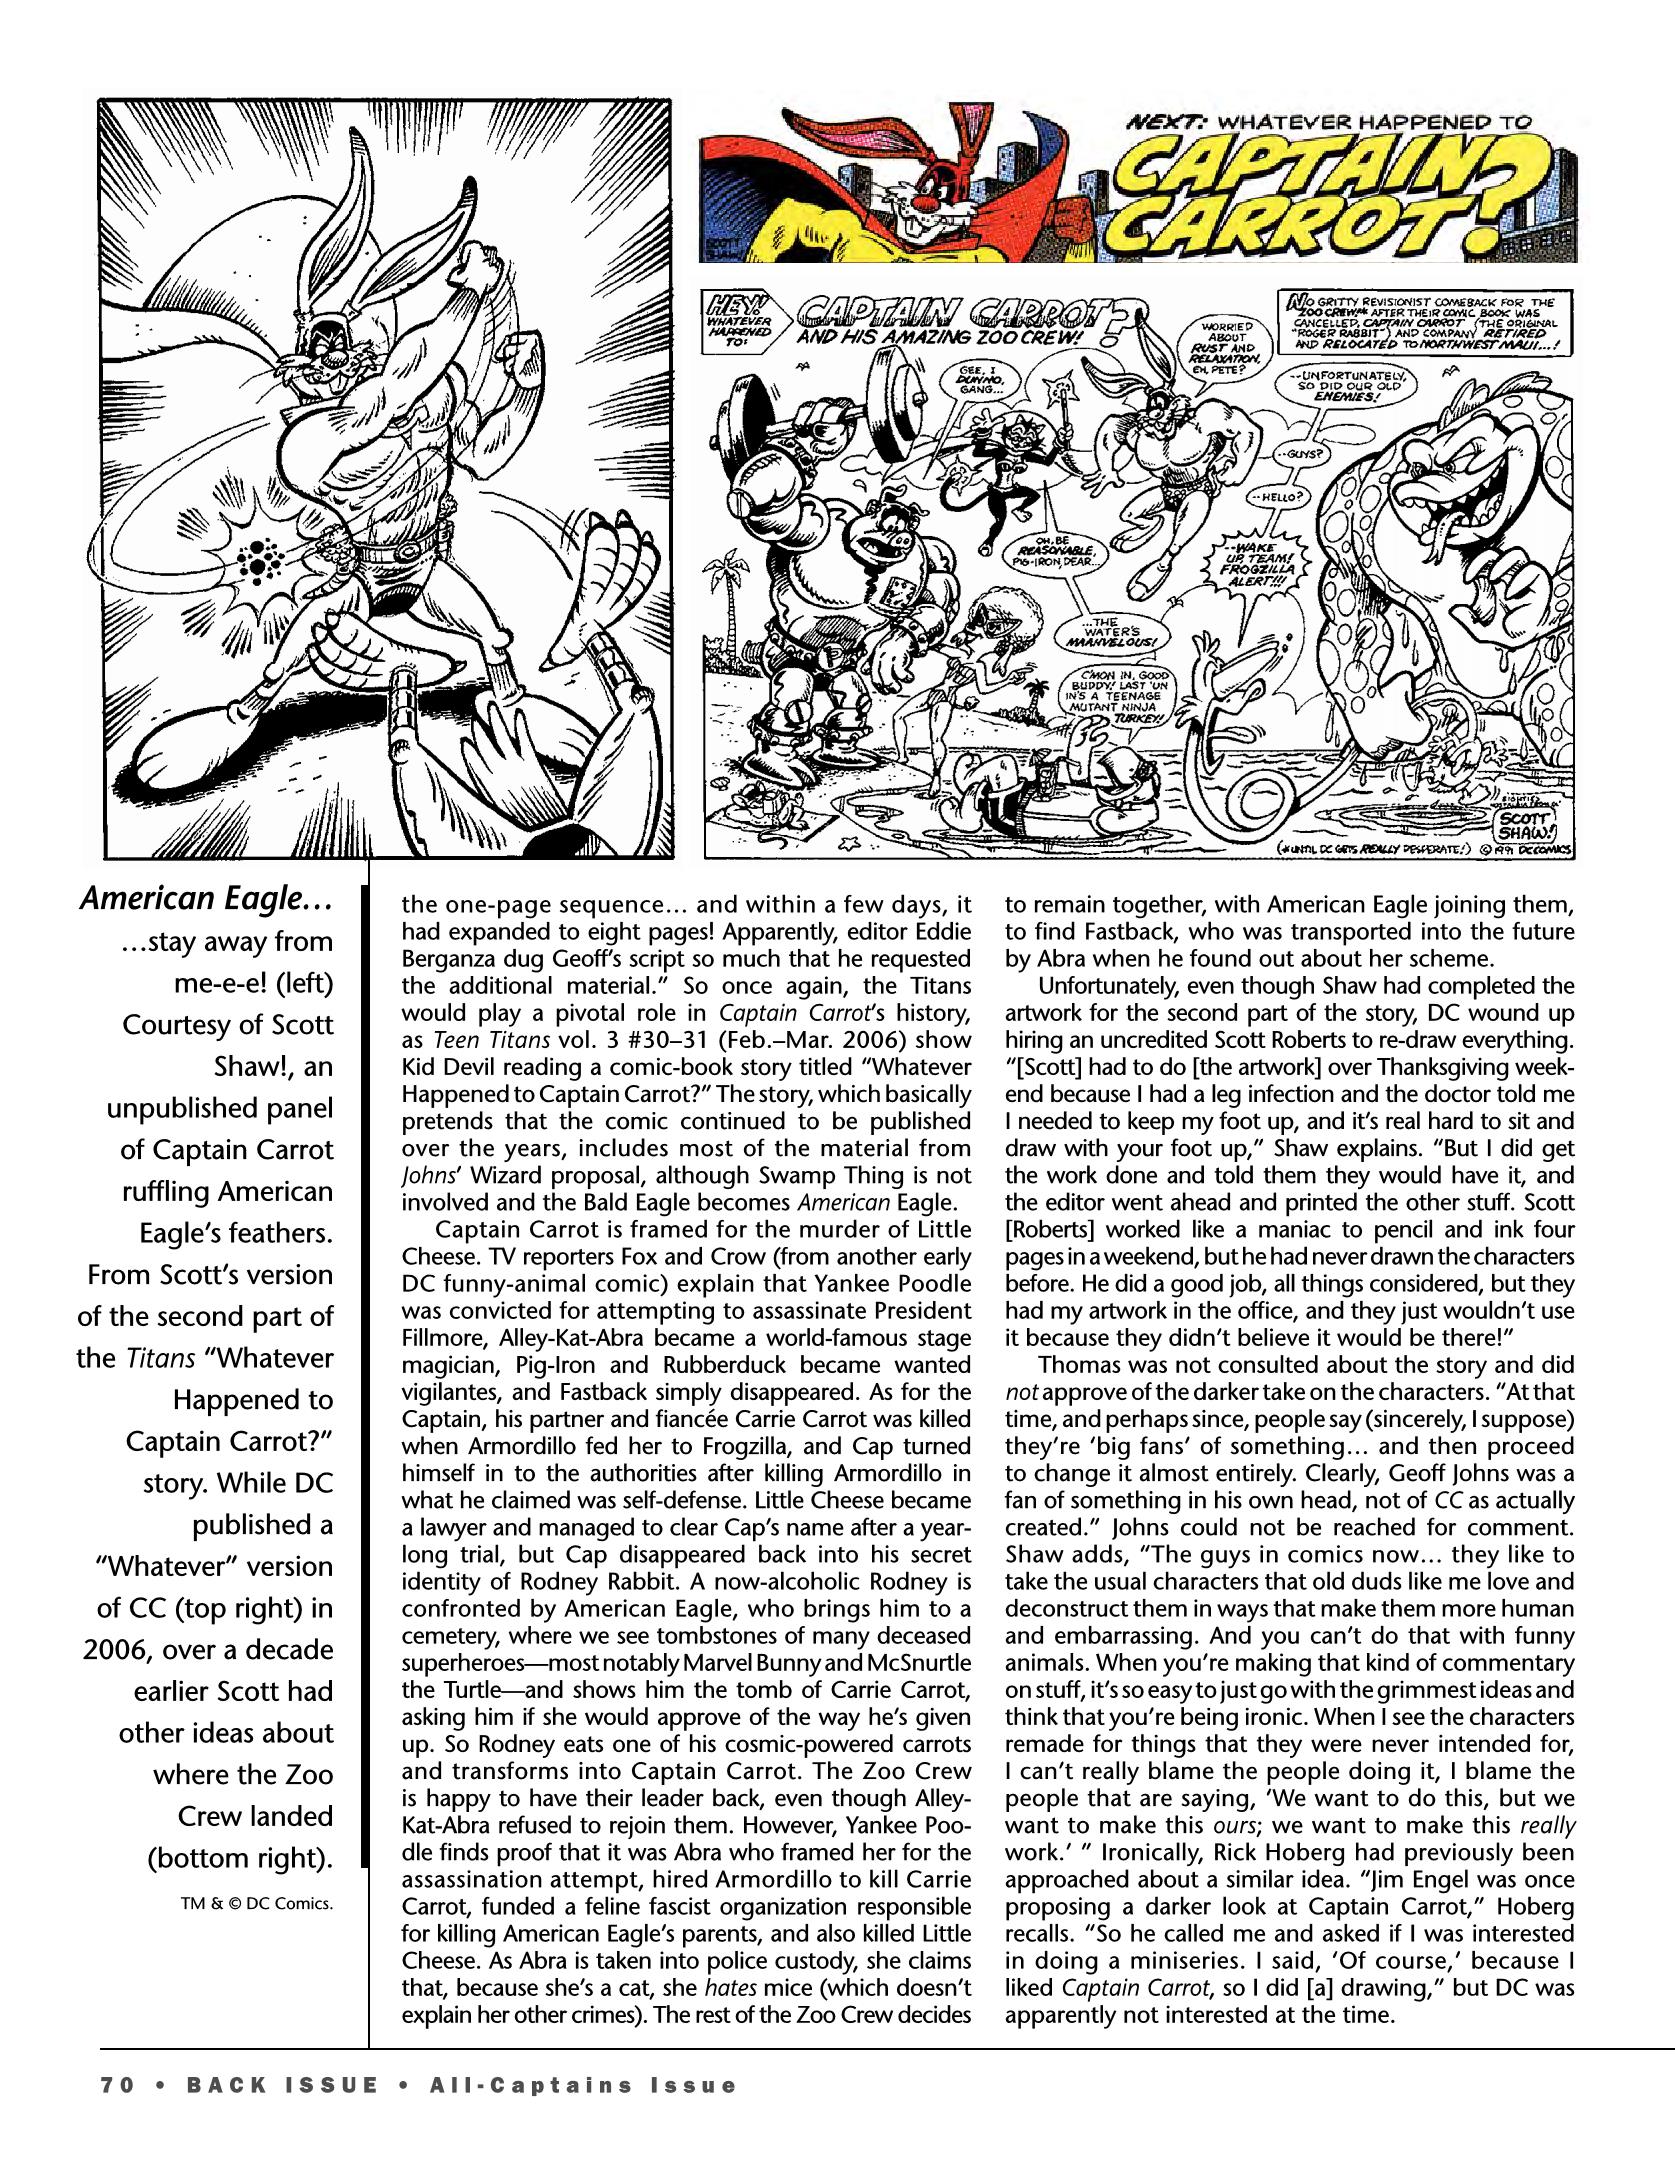 Read online Back Issue comic -  Issue #93 - 70